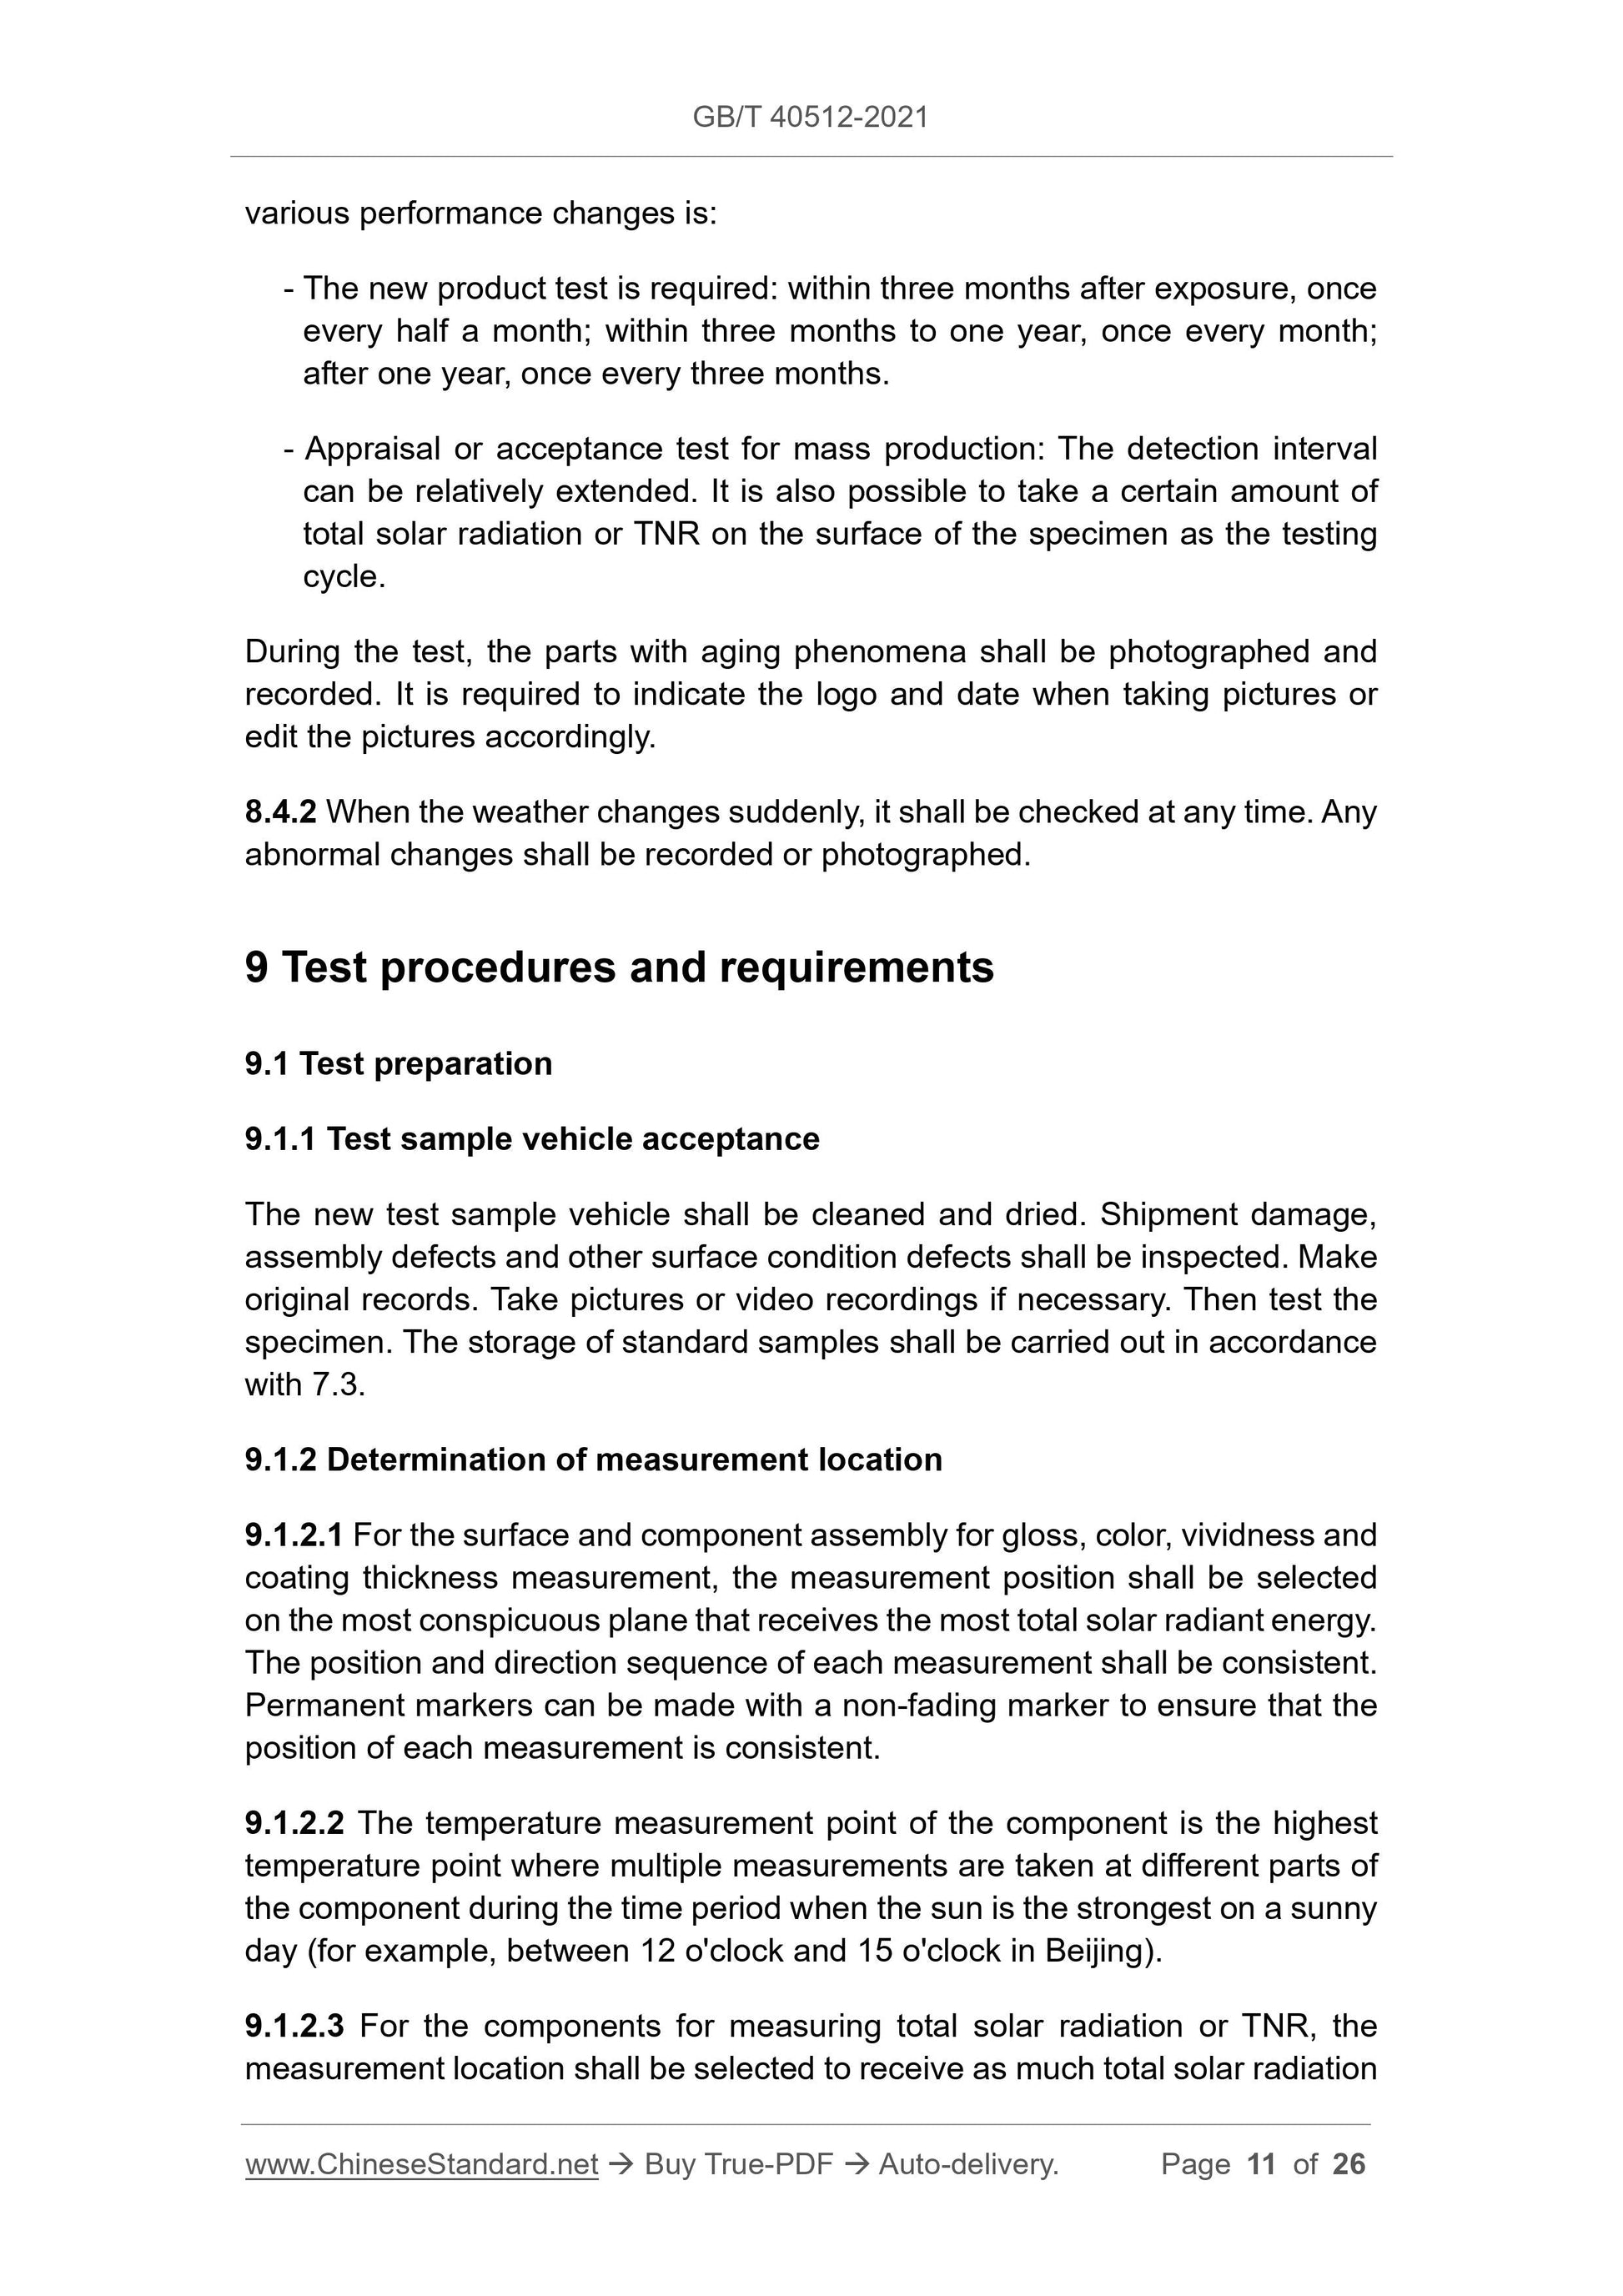 GB/T 40512-2021 Page 7